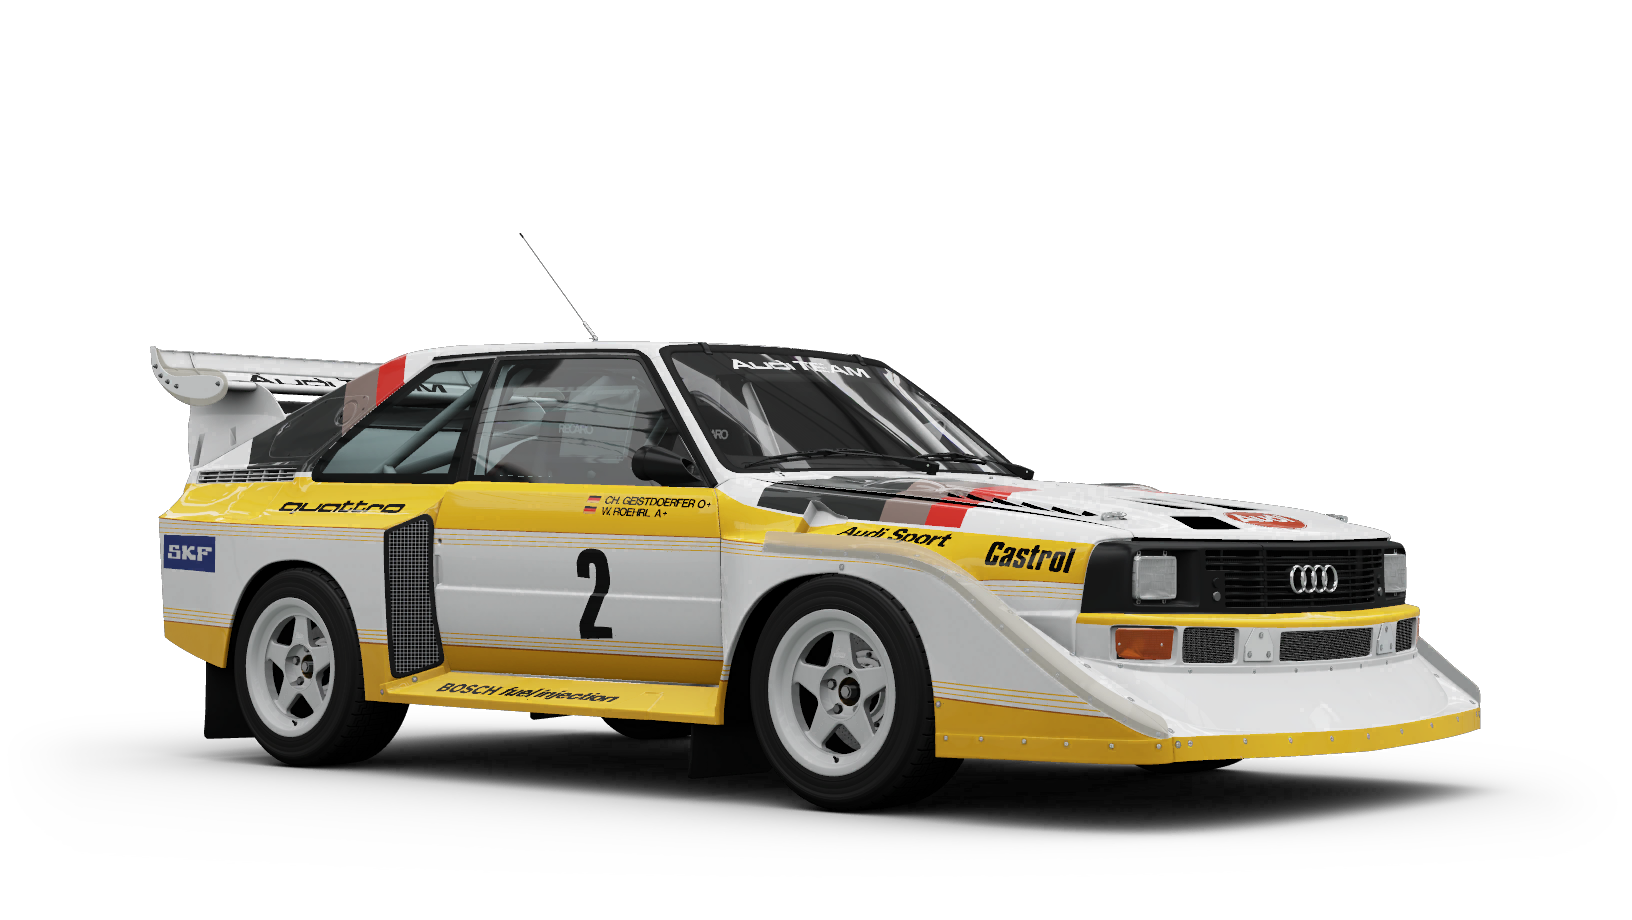 https://static.wikia.nocookie.net/forzamotorsport/images/6/63/HOR_XB1_Audi_2_S1.png/revision/latest?cb=20191201154055